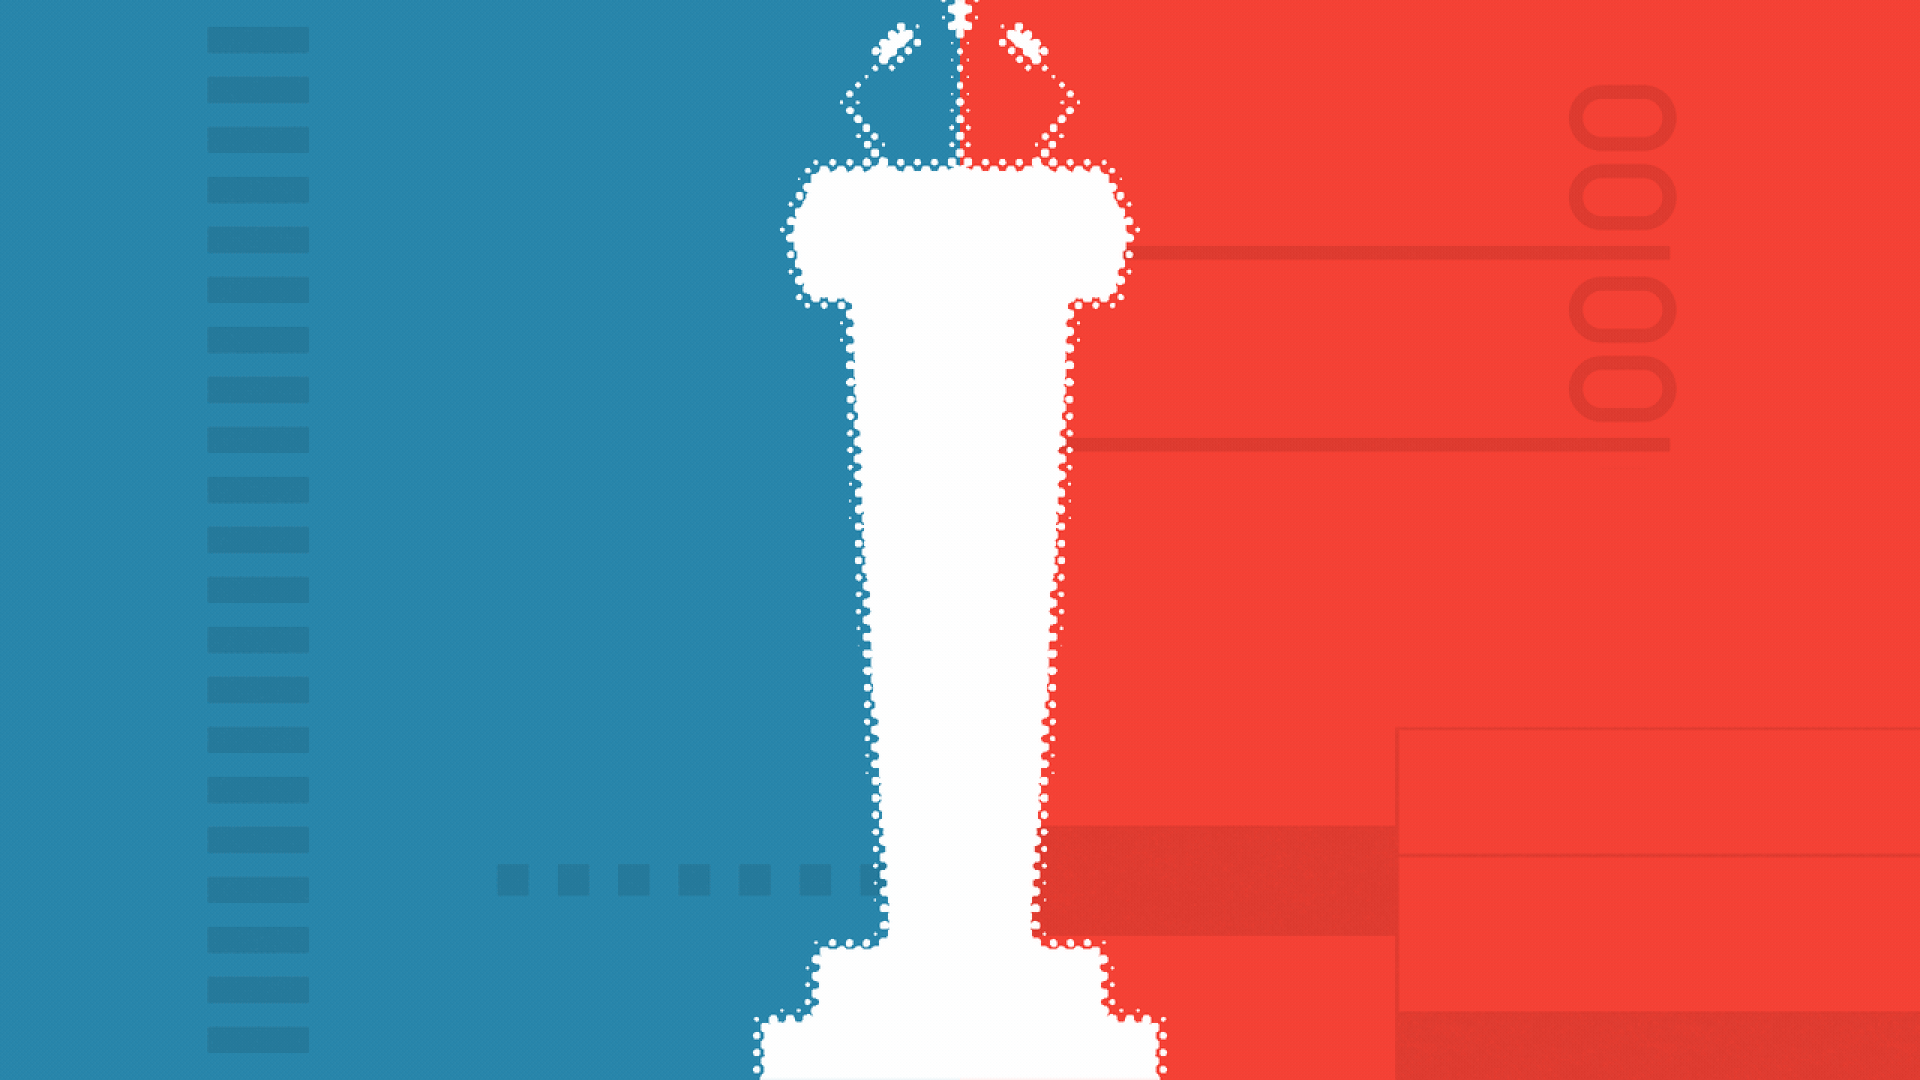 Illustration of a white podium that transforms into a voting booth and then three campaign signs, over a divided red and blue background.